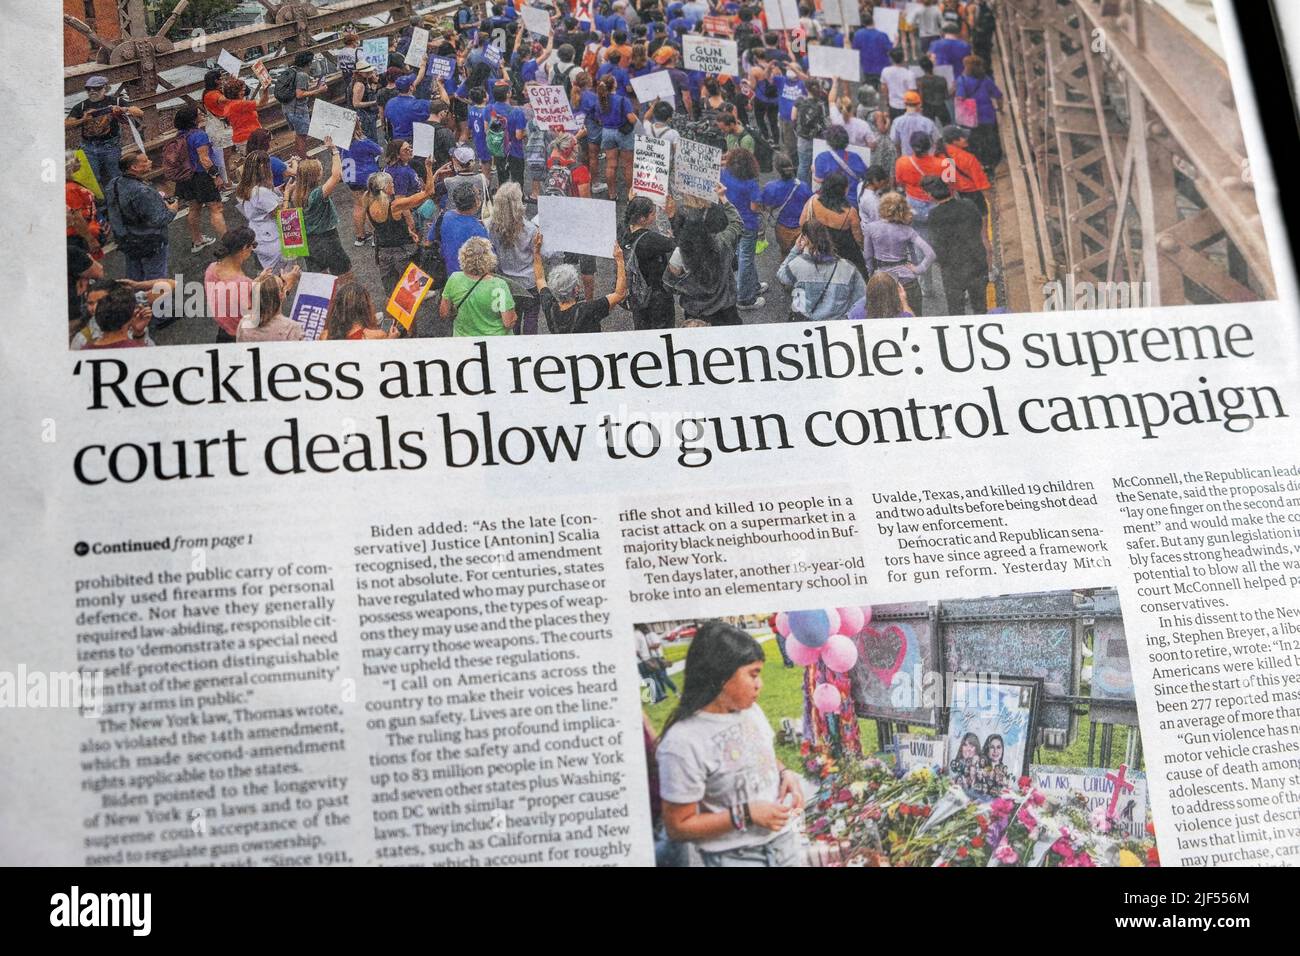 'Reckless and reprehensible: US supreme court deals blow to gun control campaign' Guardian newspaper headline Uvalde guns article on 23 June 2022 UK Stock Photo